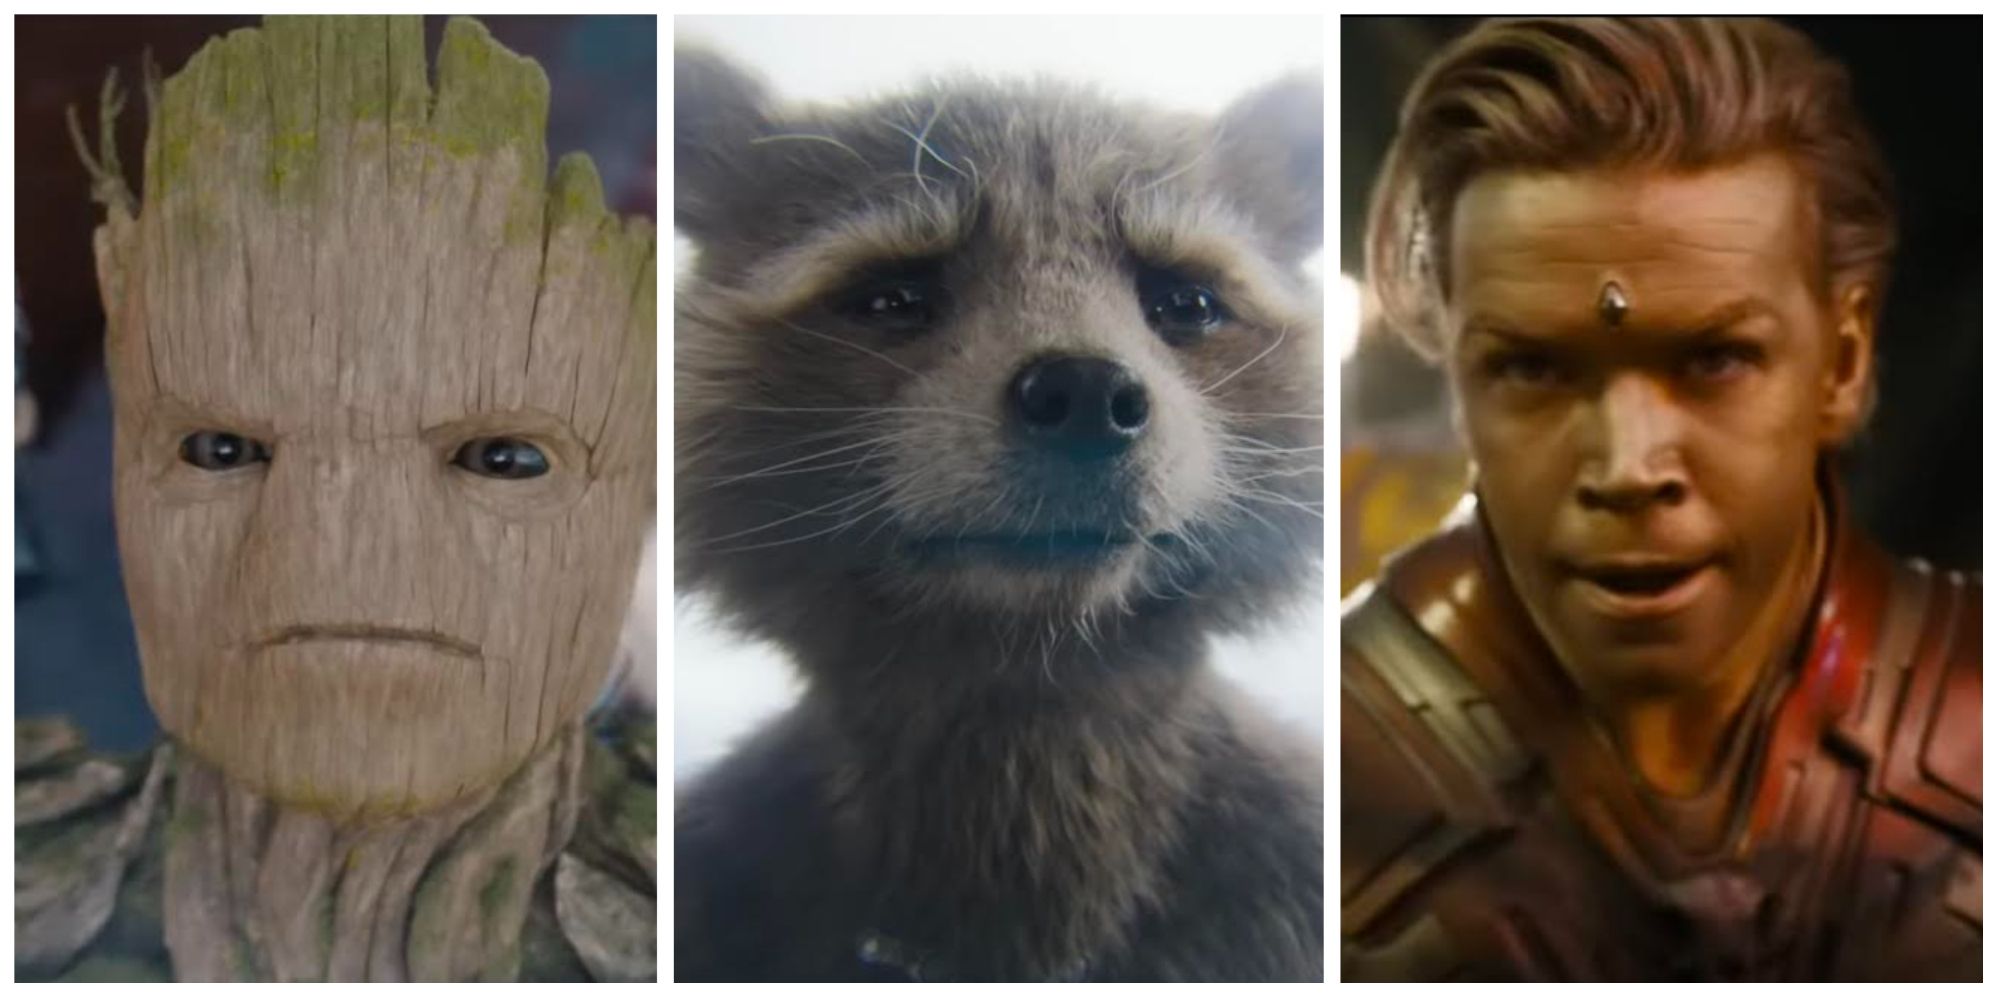 The Saddest Parts Of Guardians Of The Galaxy Vol. 3